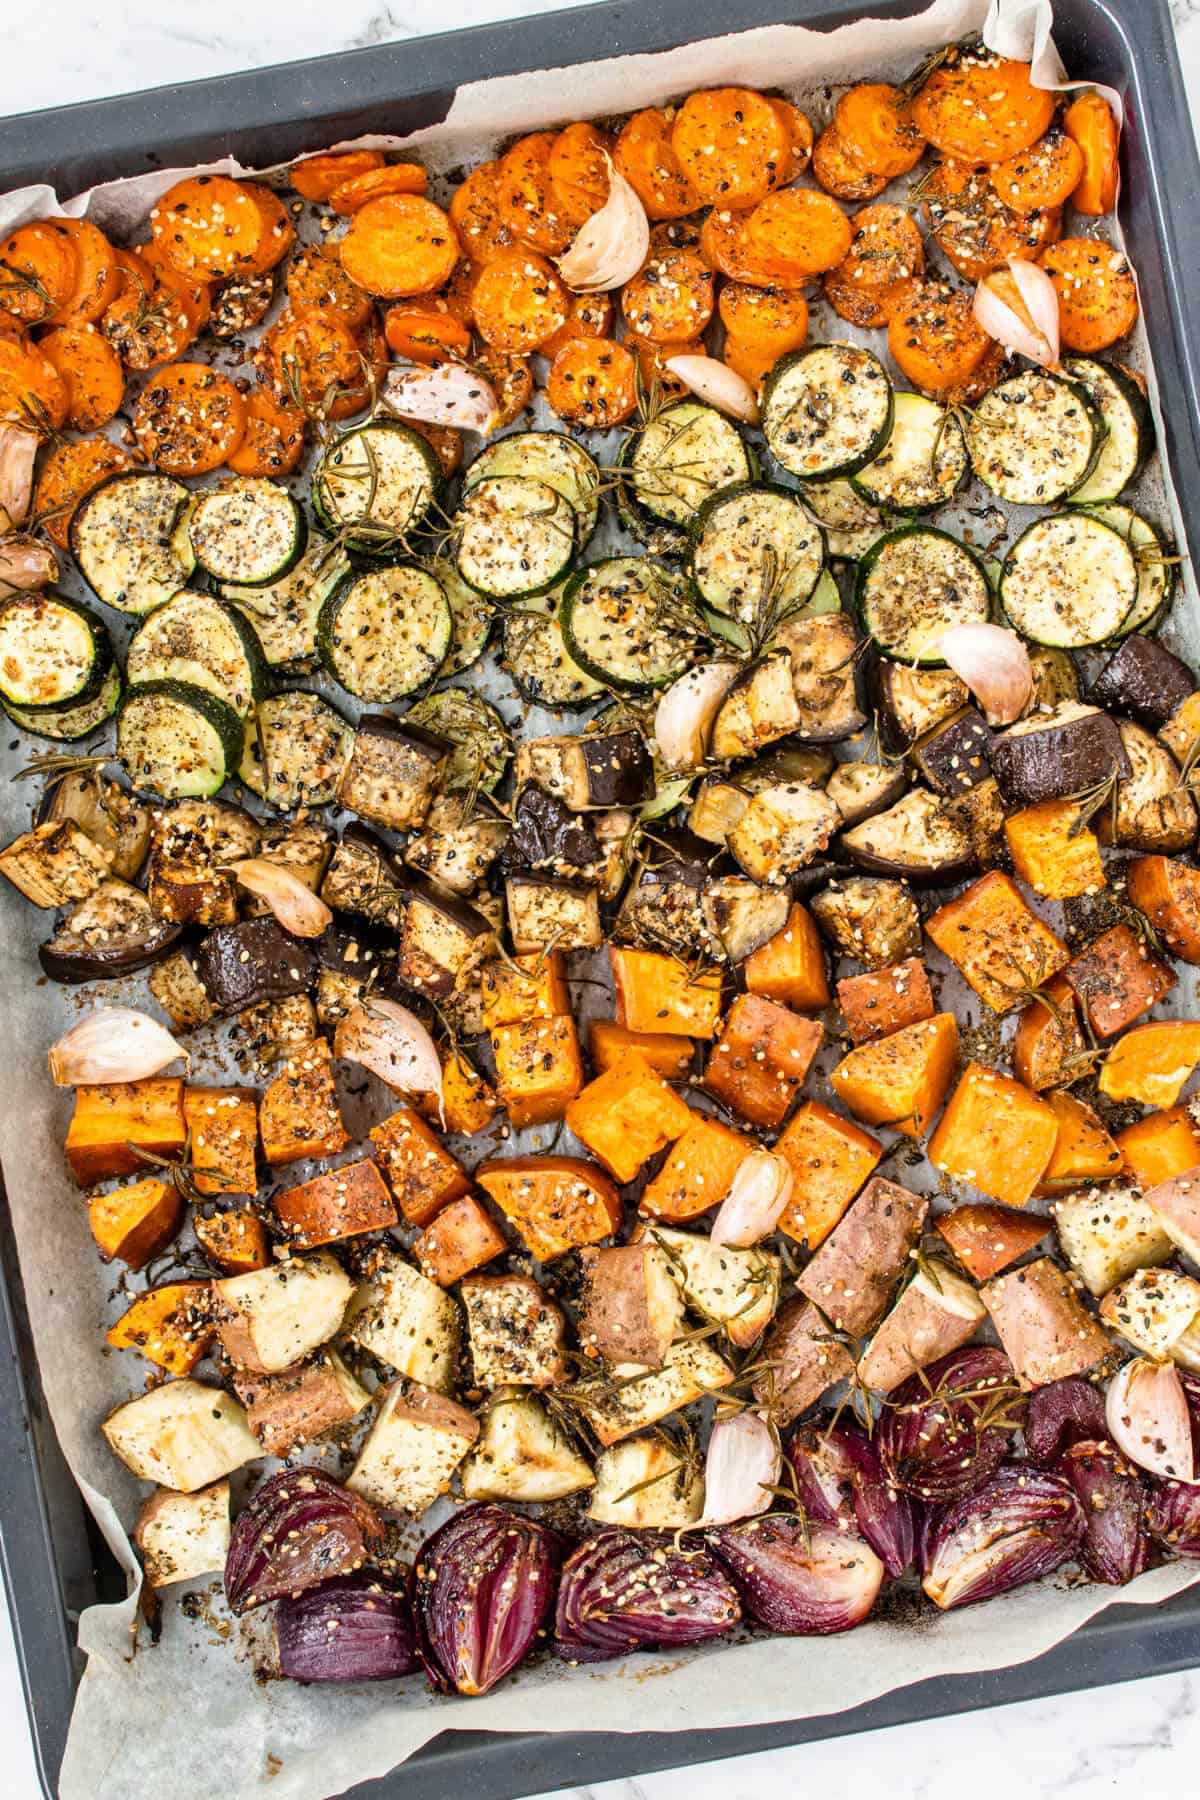 Oven Roasted Vegetables on an oven tray